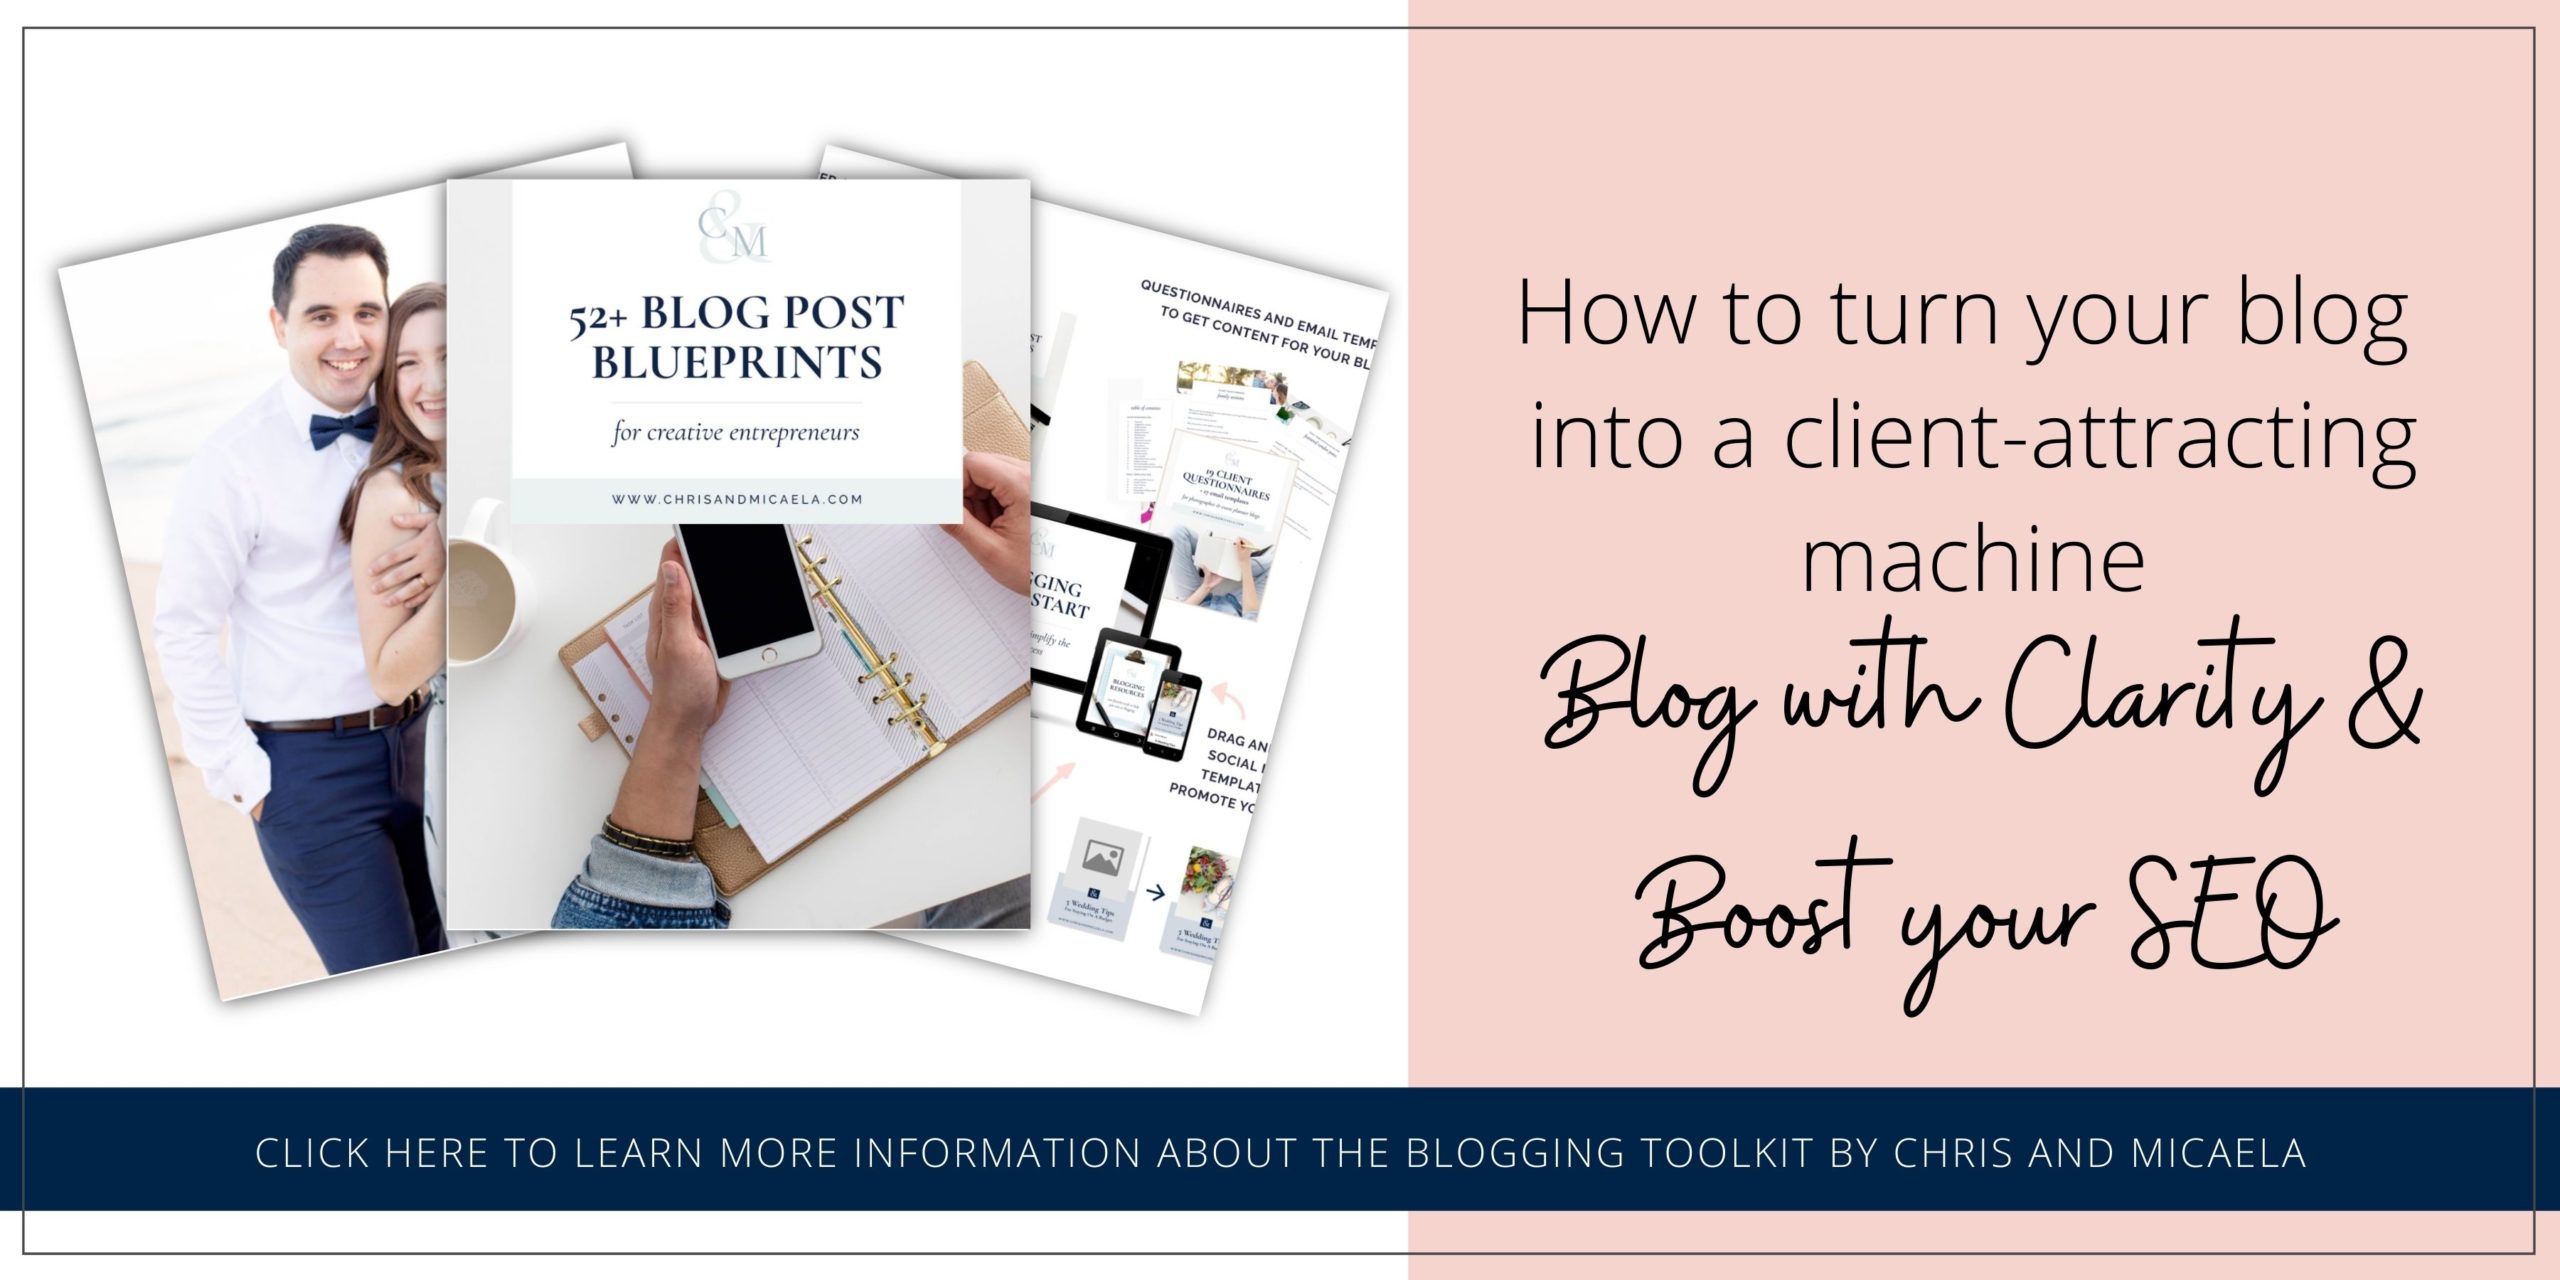 How to turn your blog into a client-attracting machine